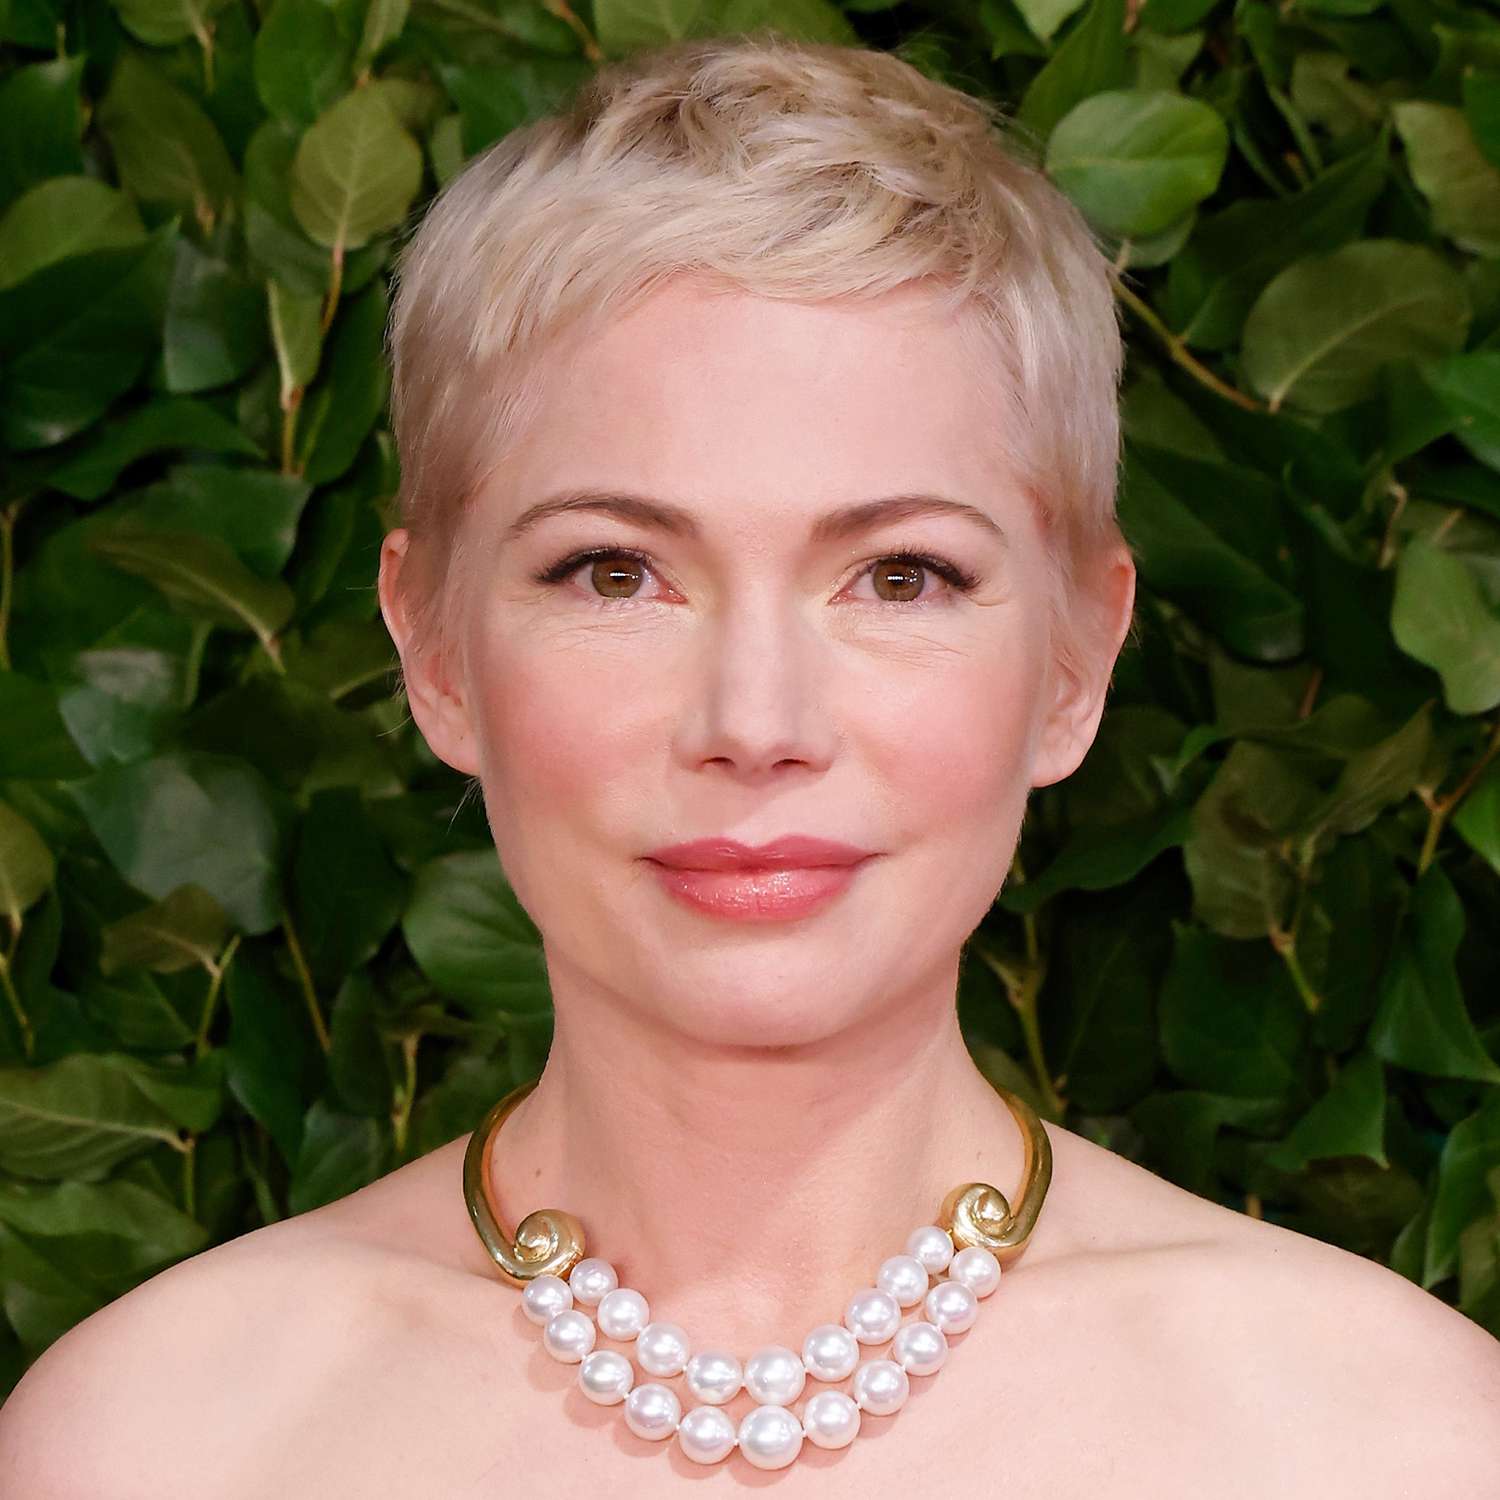 Michelle Williams attends the Gotham Awards in a classic bleach and toned pixie